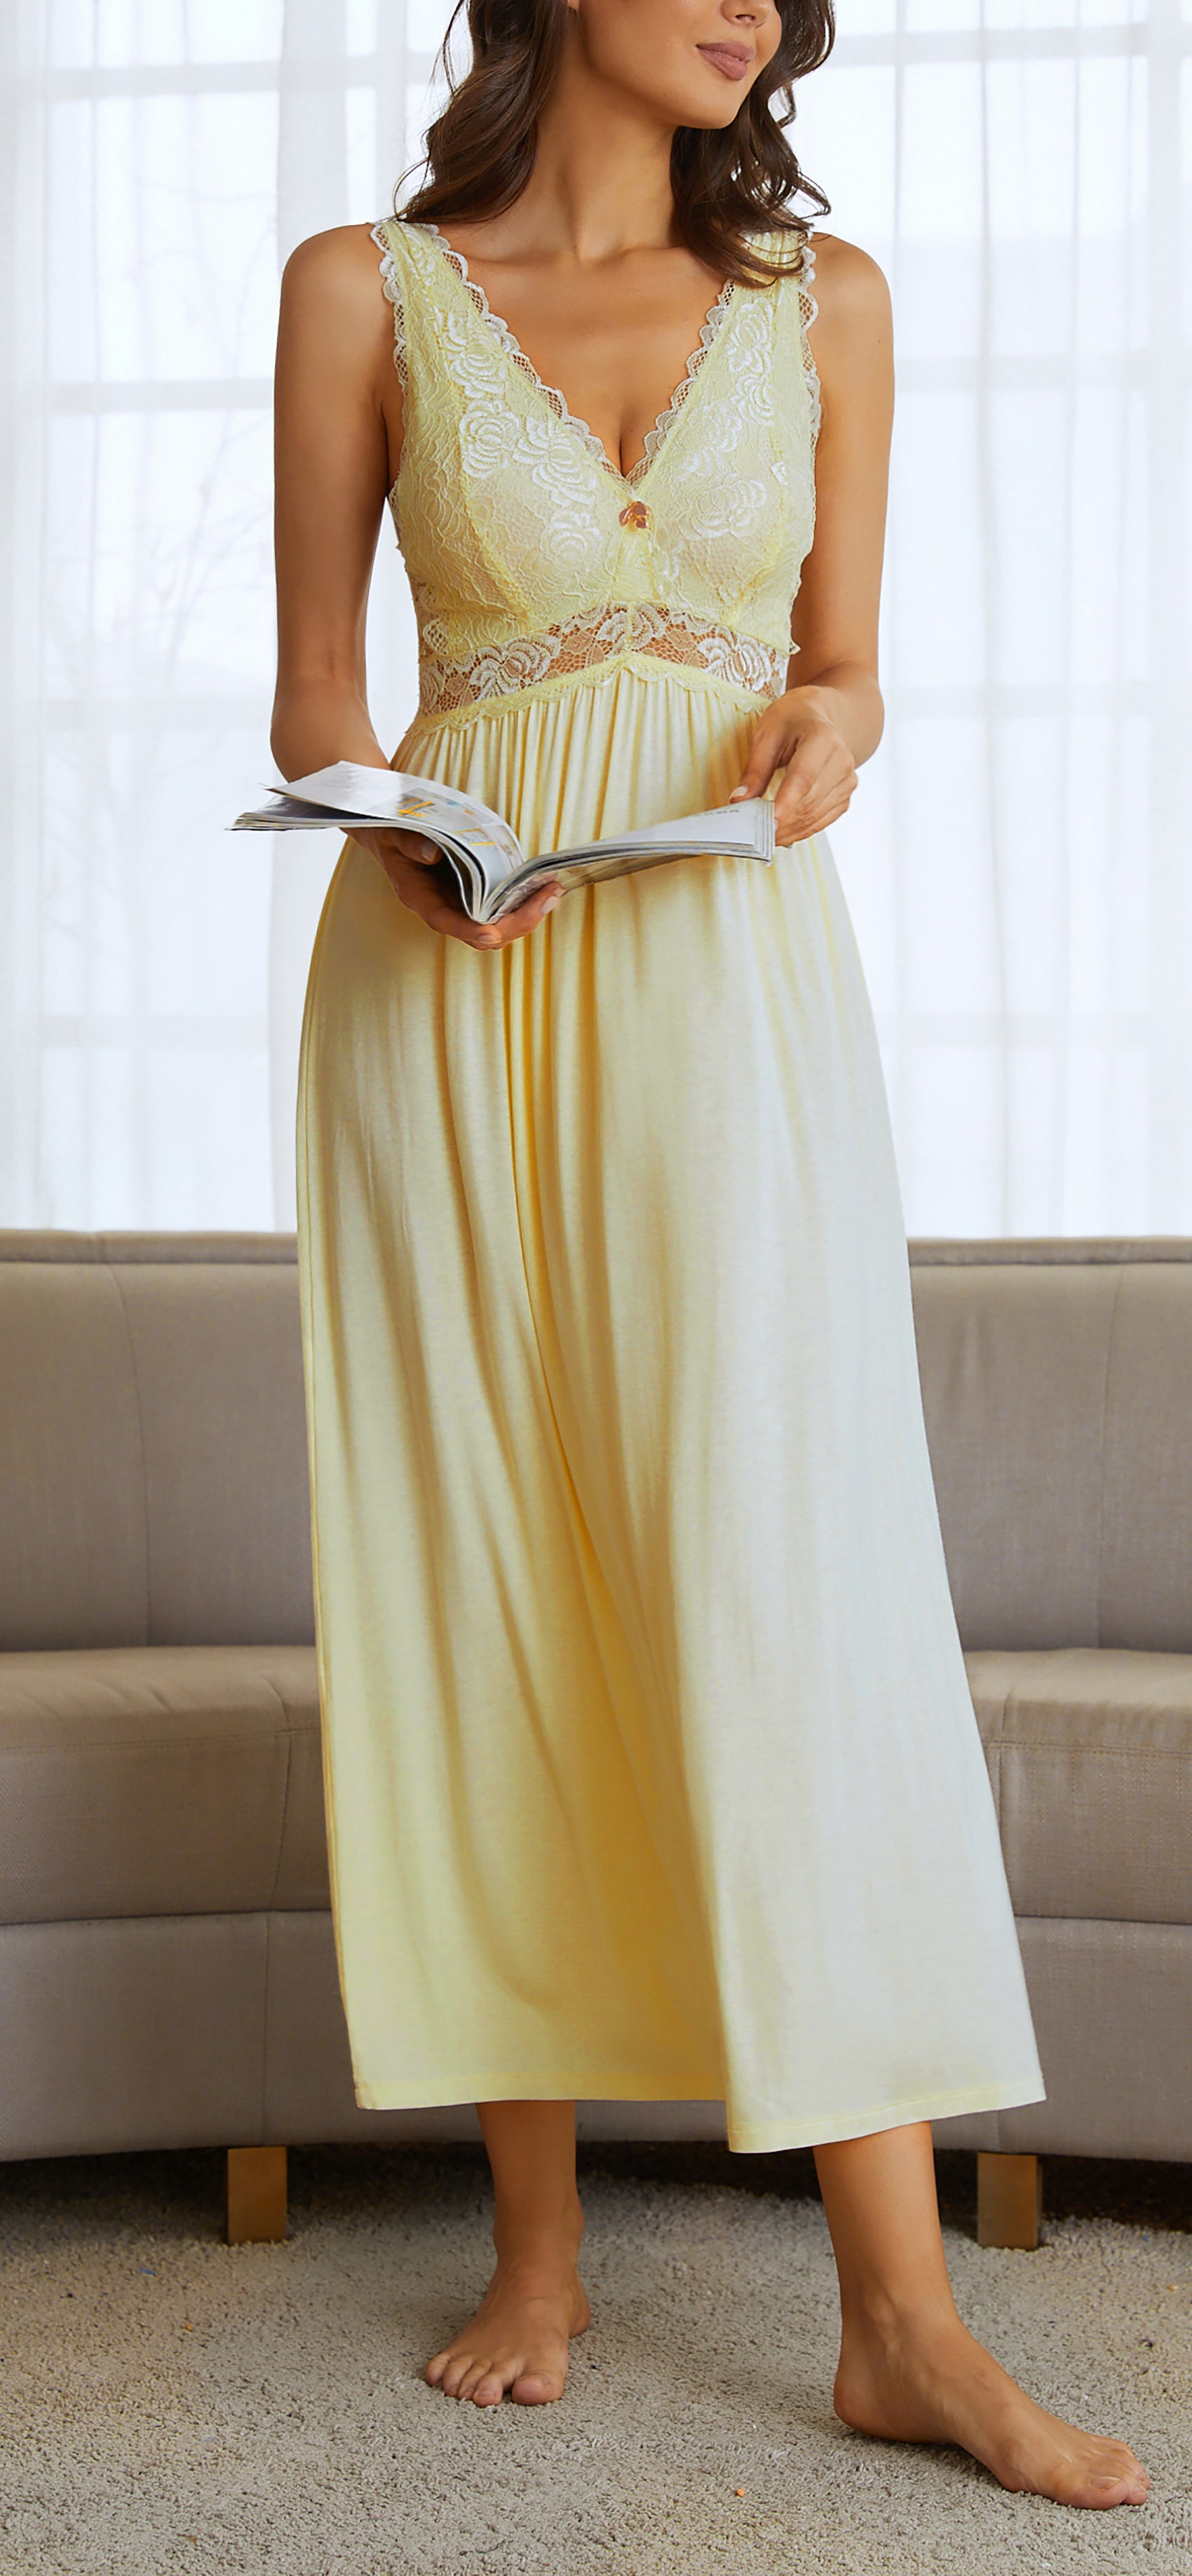 Sexy Lace Jersey Elegant Long Nightgown Chemises Light Yellow